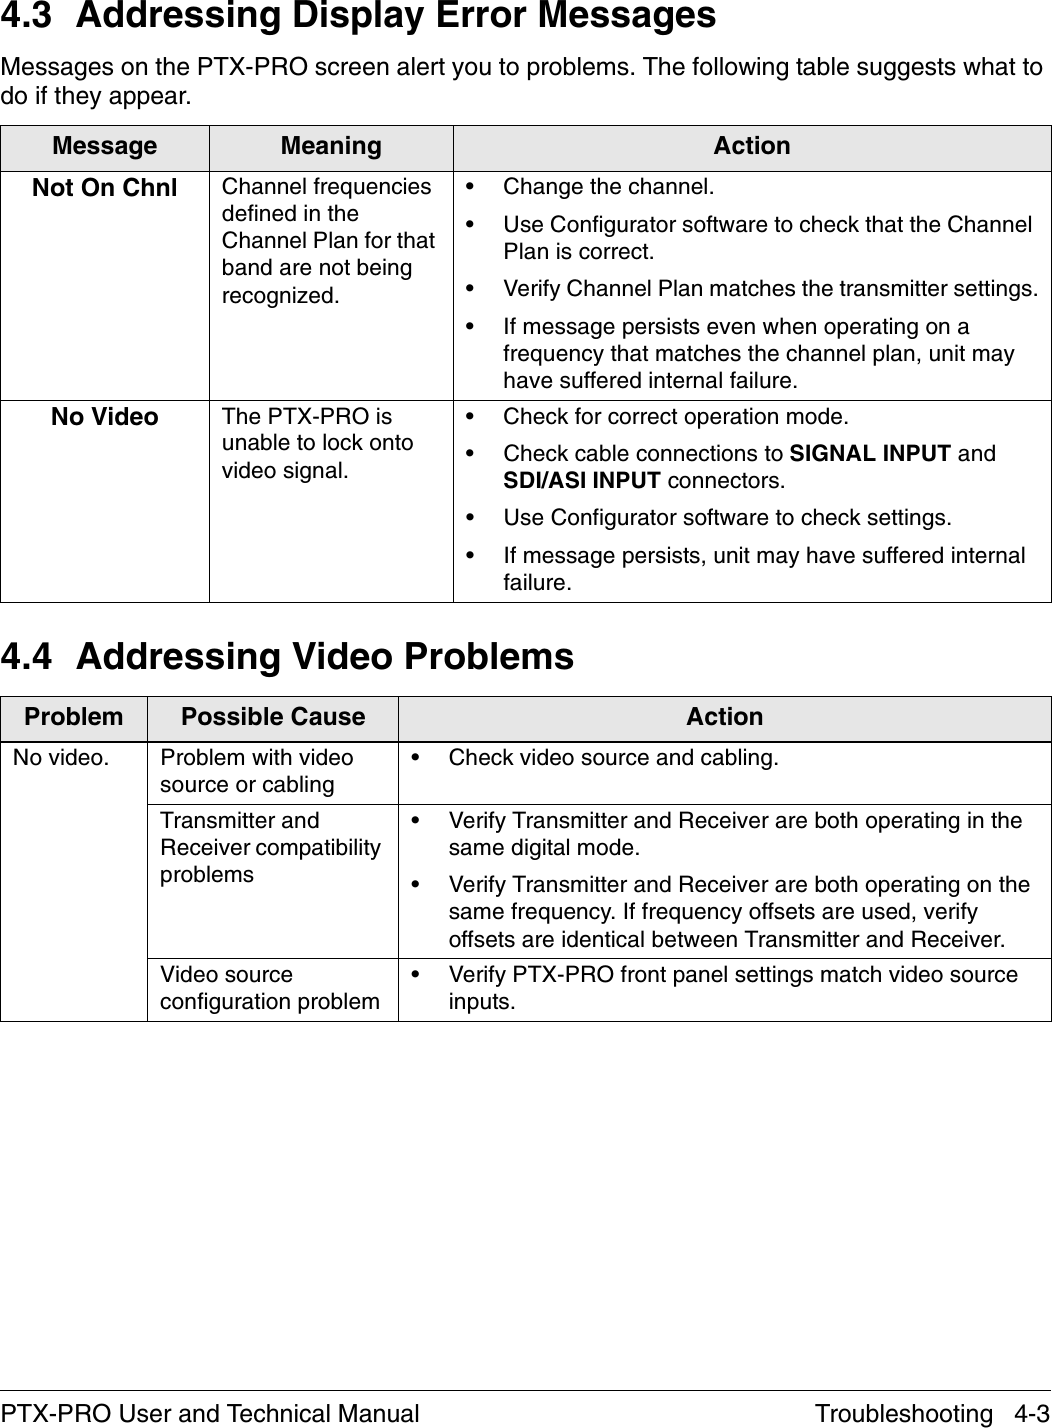 Troubleshooting   4-3PTX-PRO User and Technical Manual4.3 Addressing Display Error MessagesMessages on the PTX-PRO screen alert you to problems. The following table suggests what to do if they appear.4.4 Addressing Video ProblemsMessage Meaning ActionNot On Chnl Channel frequencies defined in the Channel Plan for that band are not being recognized. • Change the channel.• Use Configurator software to check that the Channel Plan is correct. • Verify Channel Plan matches the transmitter settings.• If message persists even when operating on a frequency that matches the channel plan, unit may have suffered internal failure.No Video The PTX-PRO is unable to lock onto video signal.• Check for correct operation mode.• Check cable connections to SIGNAL INPUT and SDI/ASI INPUT connectors.• Use Configurator software to check settings. • If message persists, unit may have suffered internal failure.Problem Possible Cause ActionNo video. Problem with video source or cabling• Check video source and cabling.Transmitter and Receiver compatibility problems• Verify Transmitter and Receiver are both operating in the same digital mode.• Verify Transmitter and Receiver are both operating on the same frequency. If frequency offsets are used, verify offsets are identical between Transmitter and Receiver.Video source configuration problem• Verify PTX-PRO front panel settings match video source inputs.